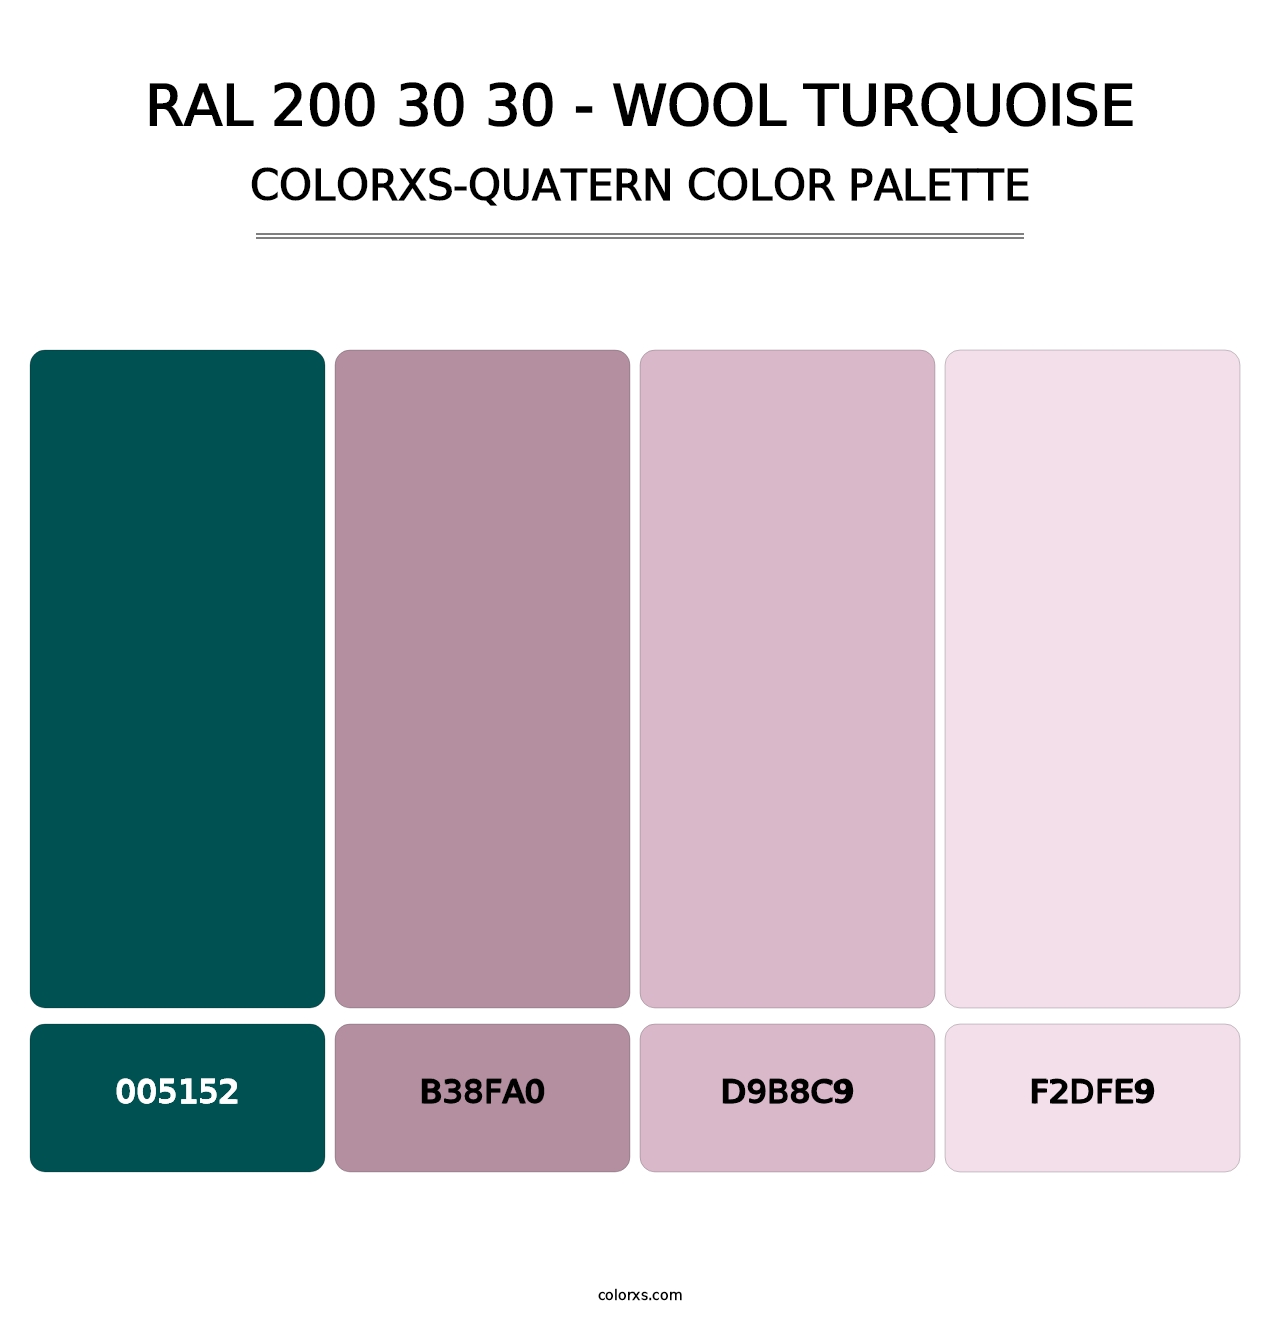 RAL 200 30 30 - Wool Turquoise - Colorxs Quatern Palette